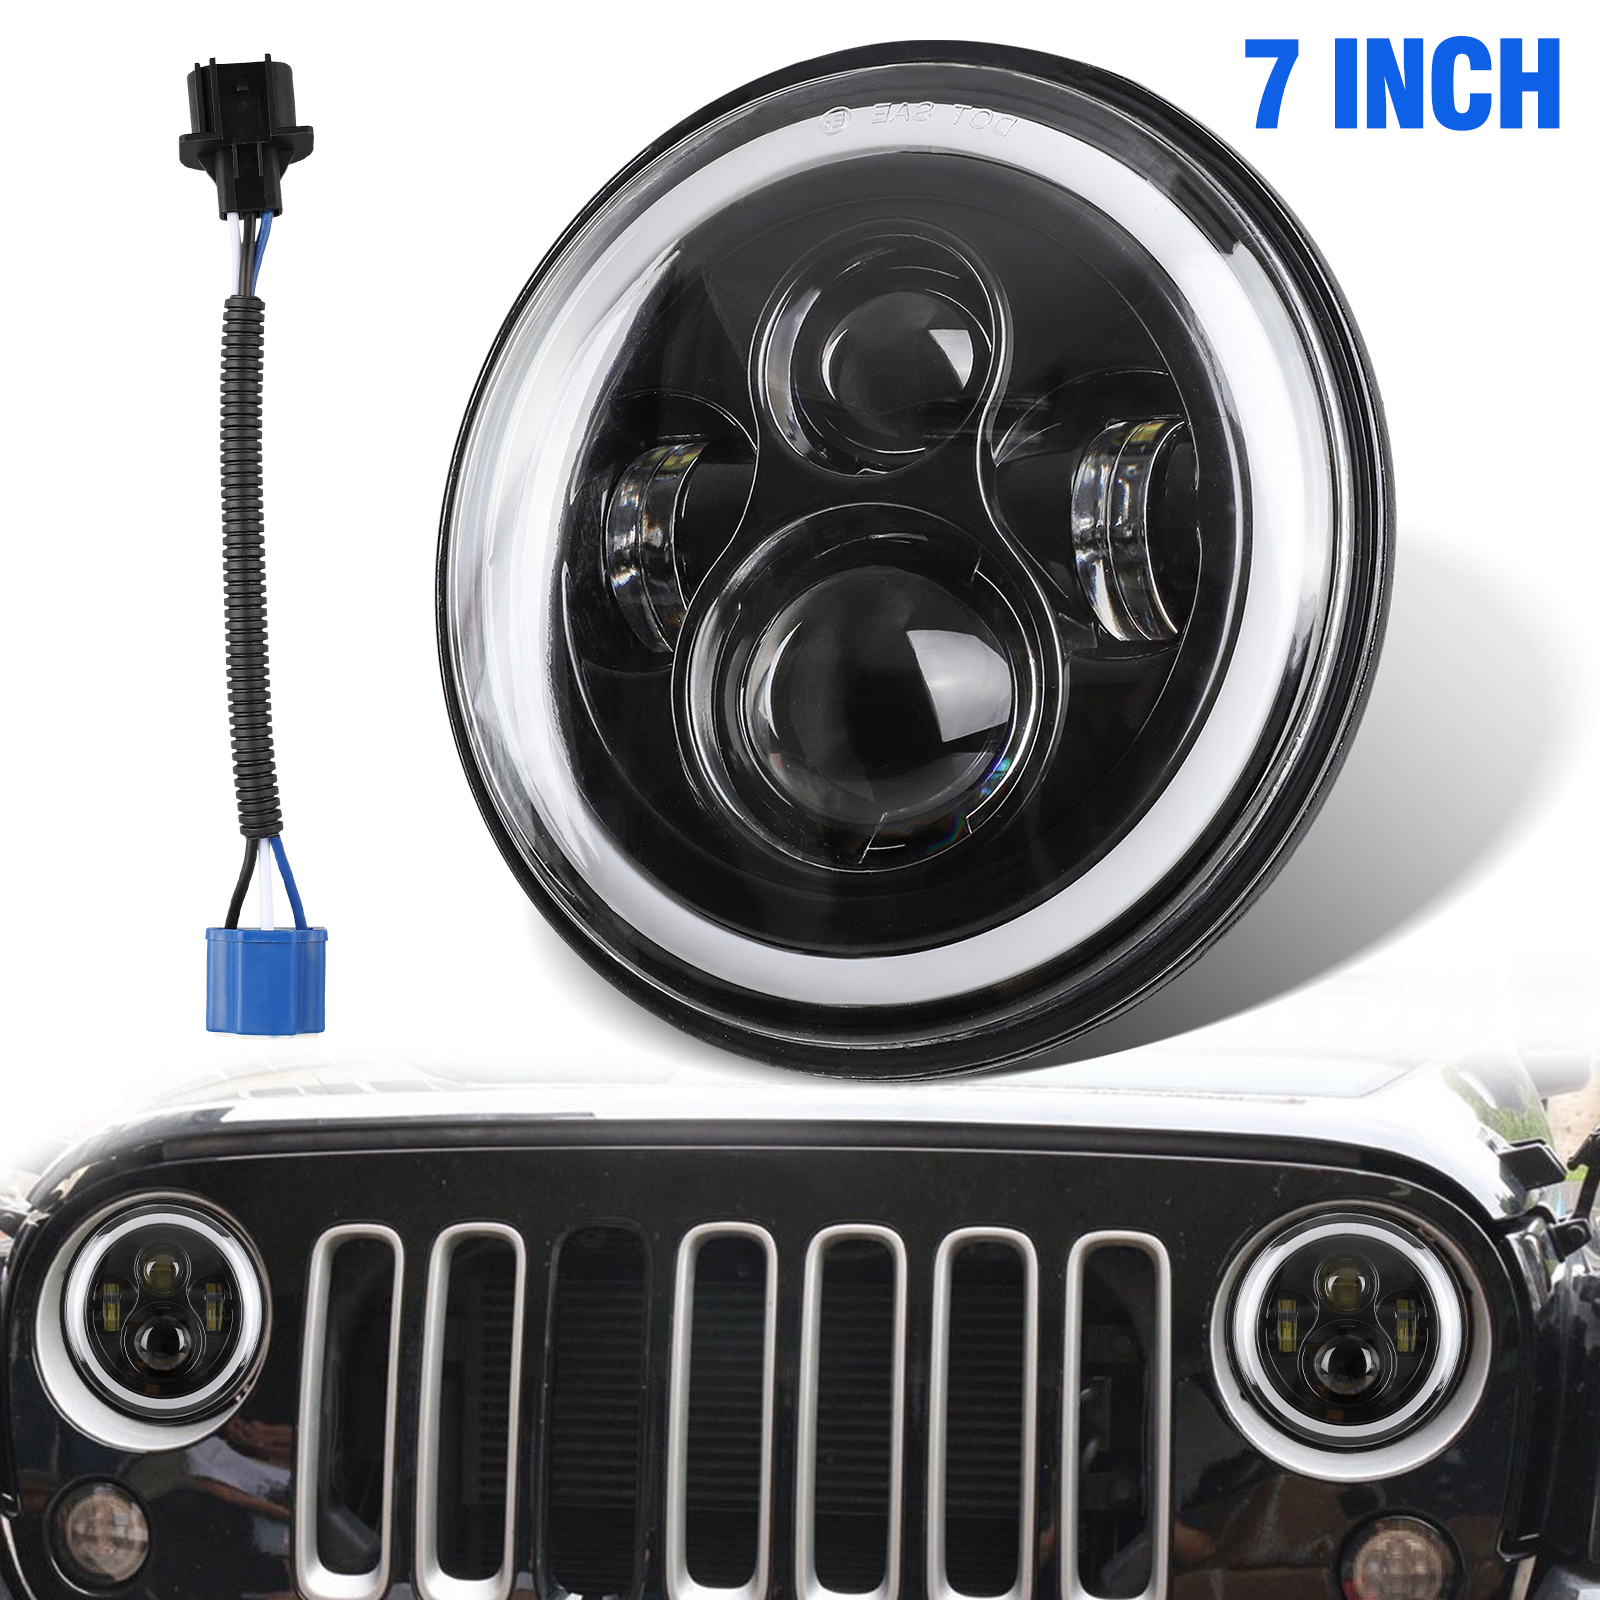 Buy DOT Approved 7 Inch LED Halo Headlights for Jeep Wrangler JK TJ LJ 1997-2018,  CREE LED Chip, 80W 9600 Lumens HiLo Beam with DRL Amber Turn Signal Light  and Halo Ring